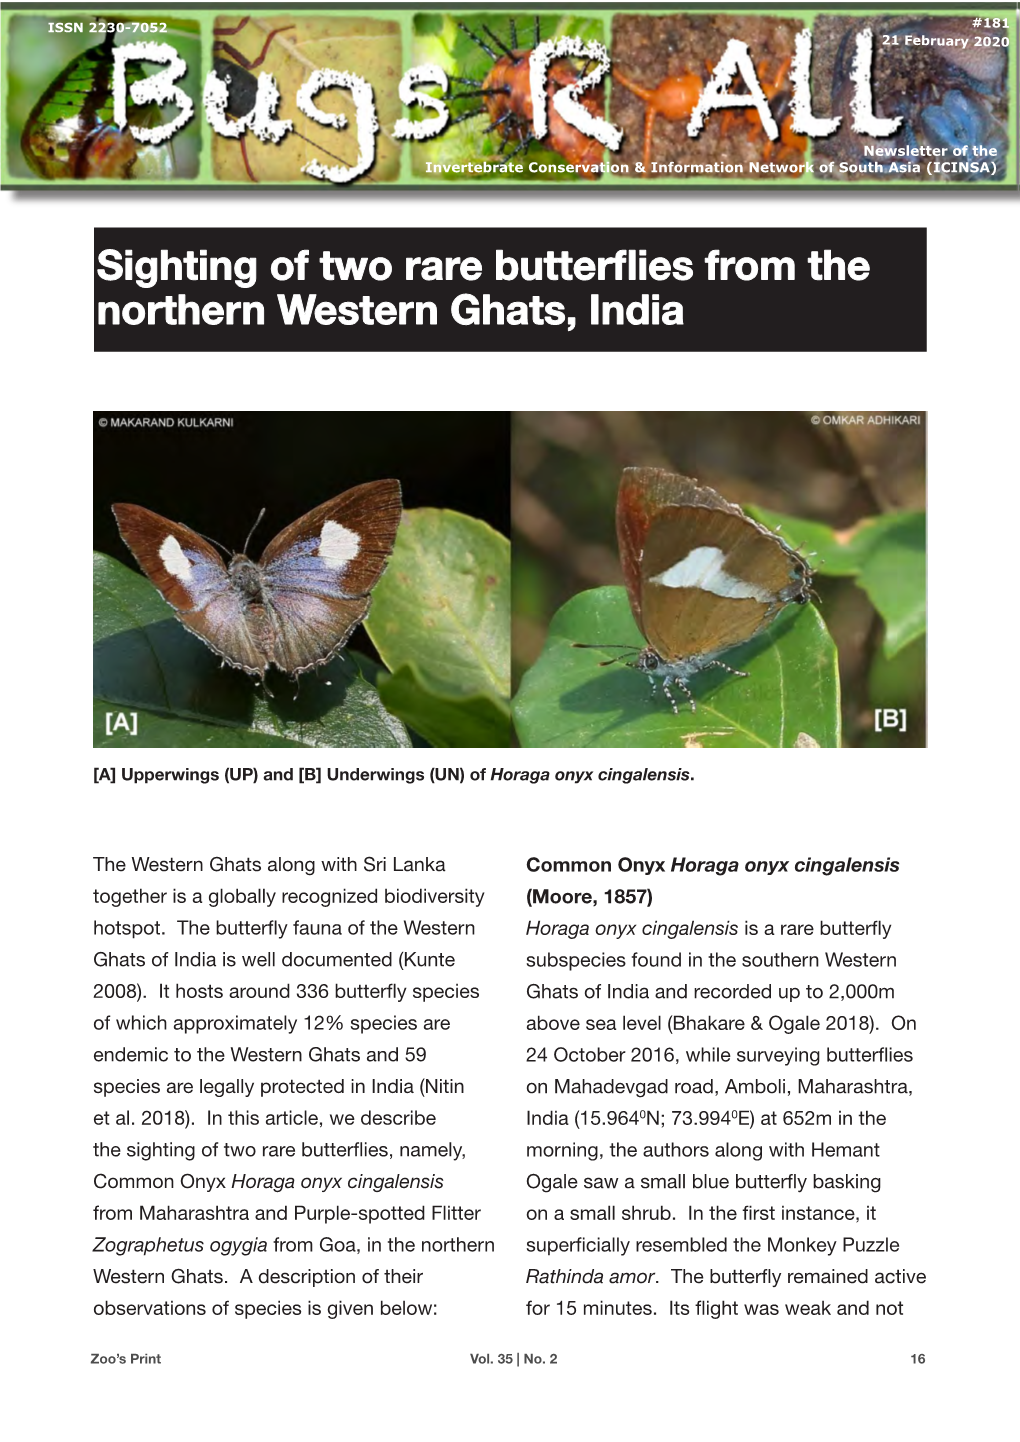 Sighting of Two Rare Butterflies from the Northern Western Ghats, India